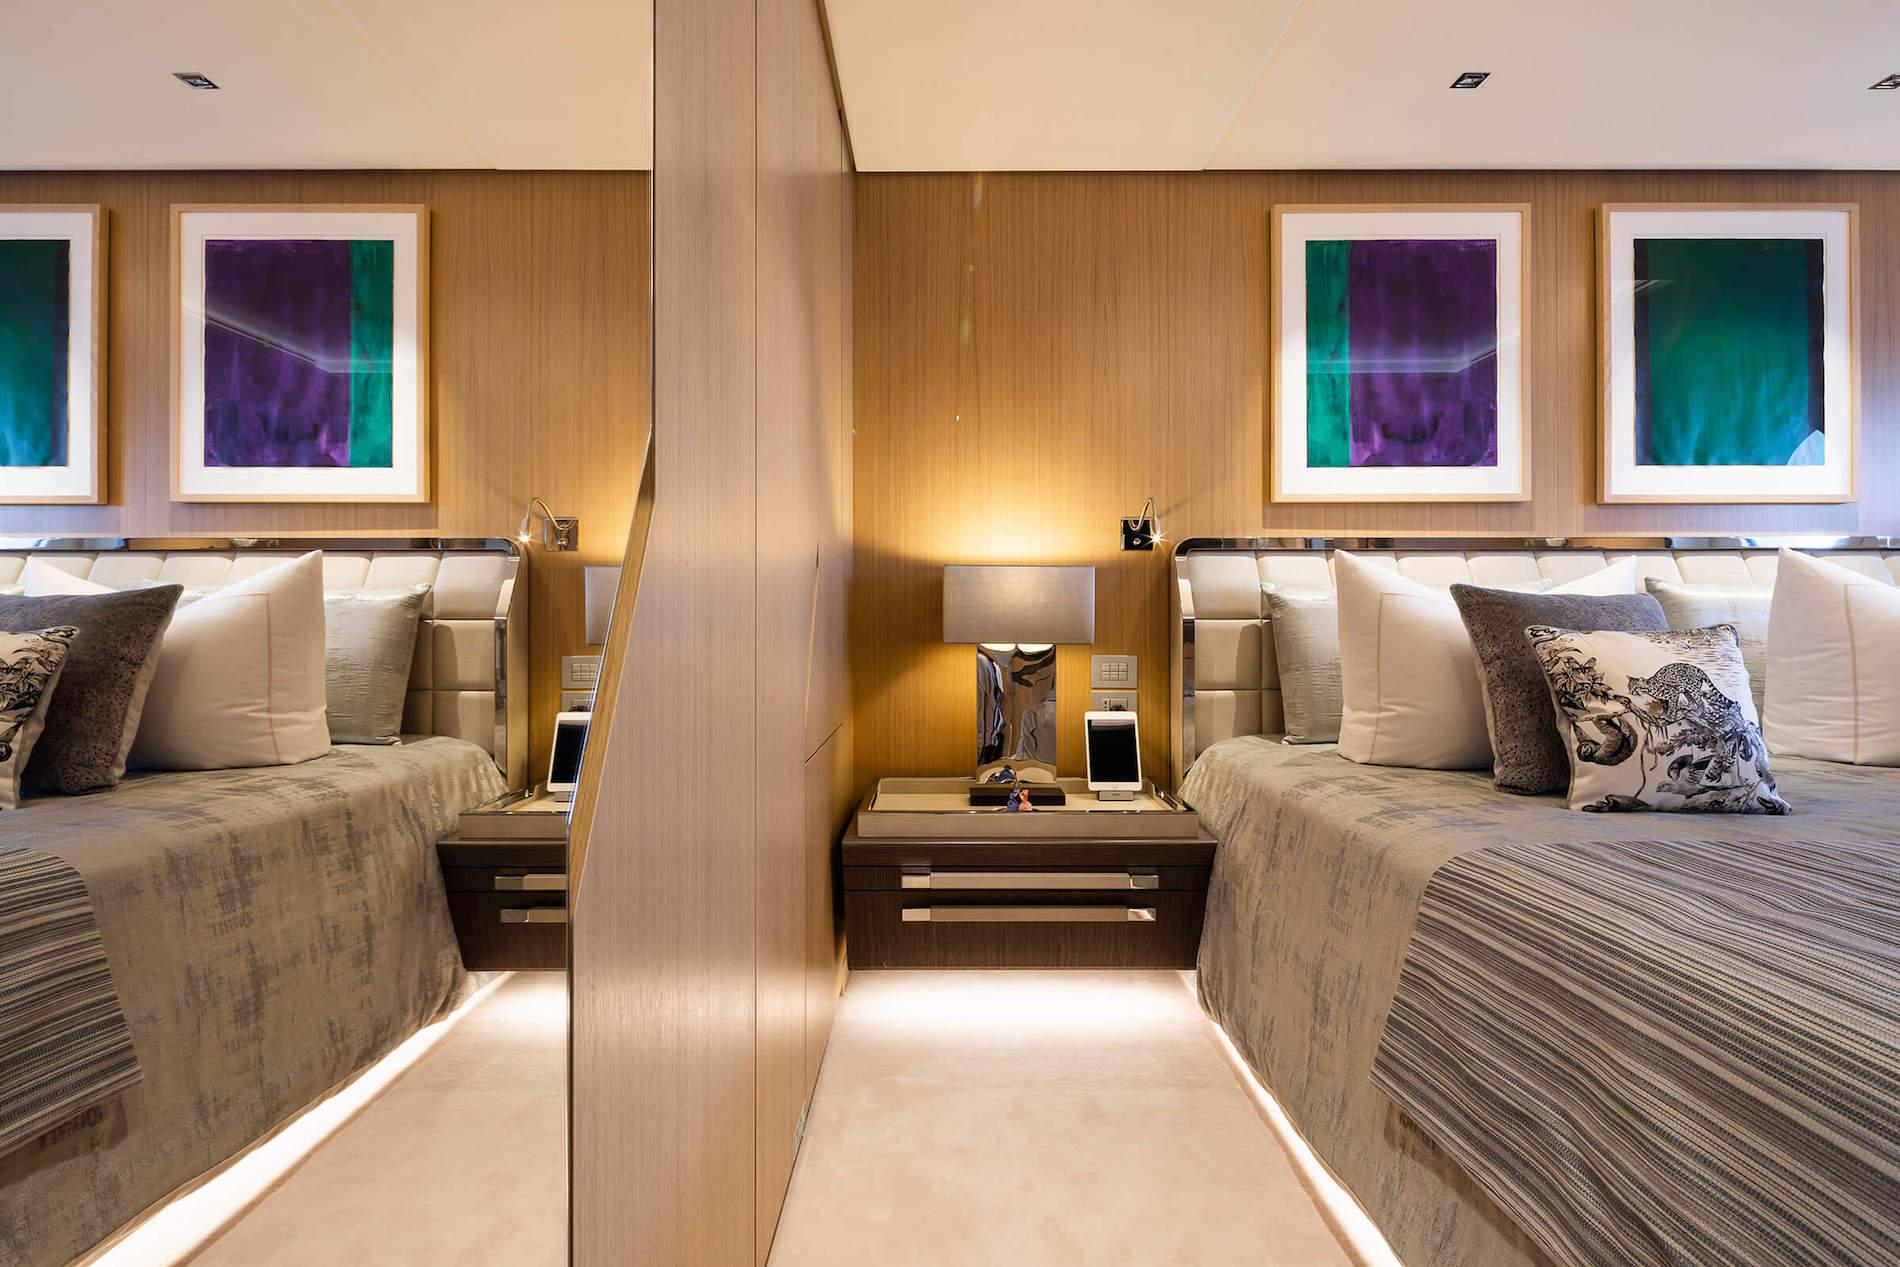 This Custom Benetti Yacht Could be Mistaken for a Lavish Mansion